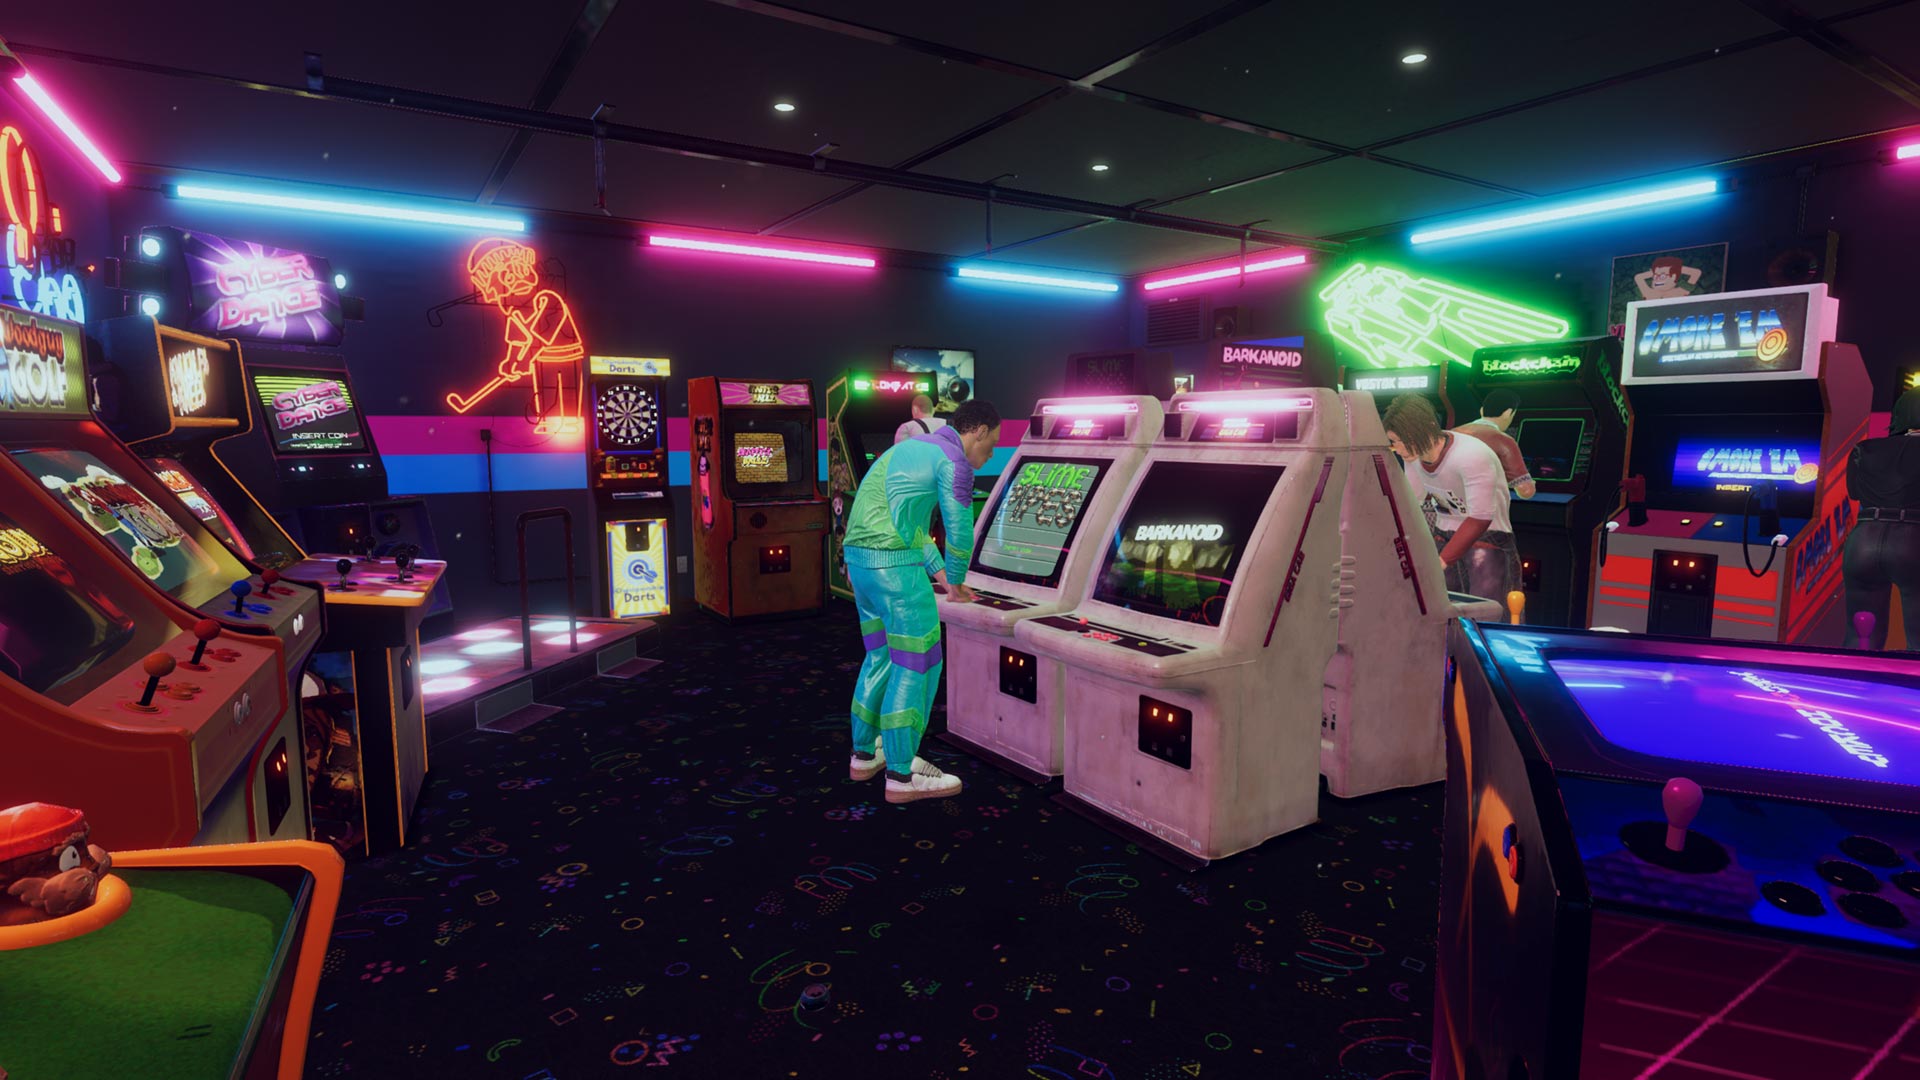 Arcade Paradise is something special